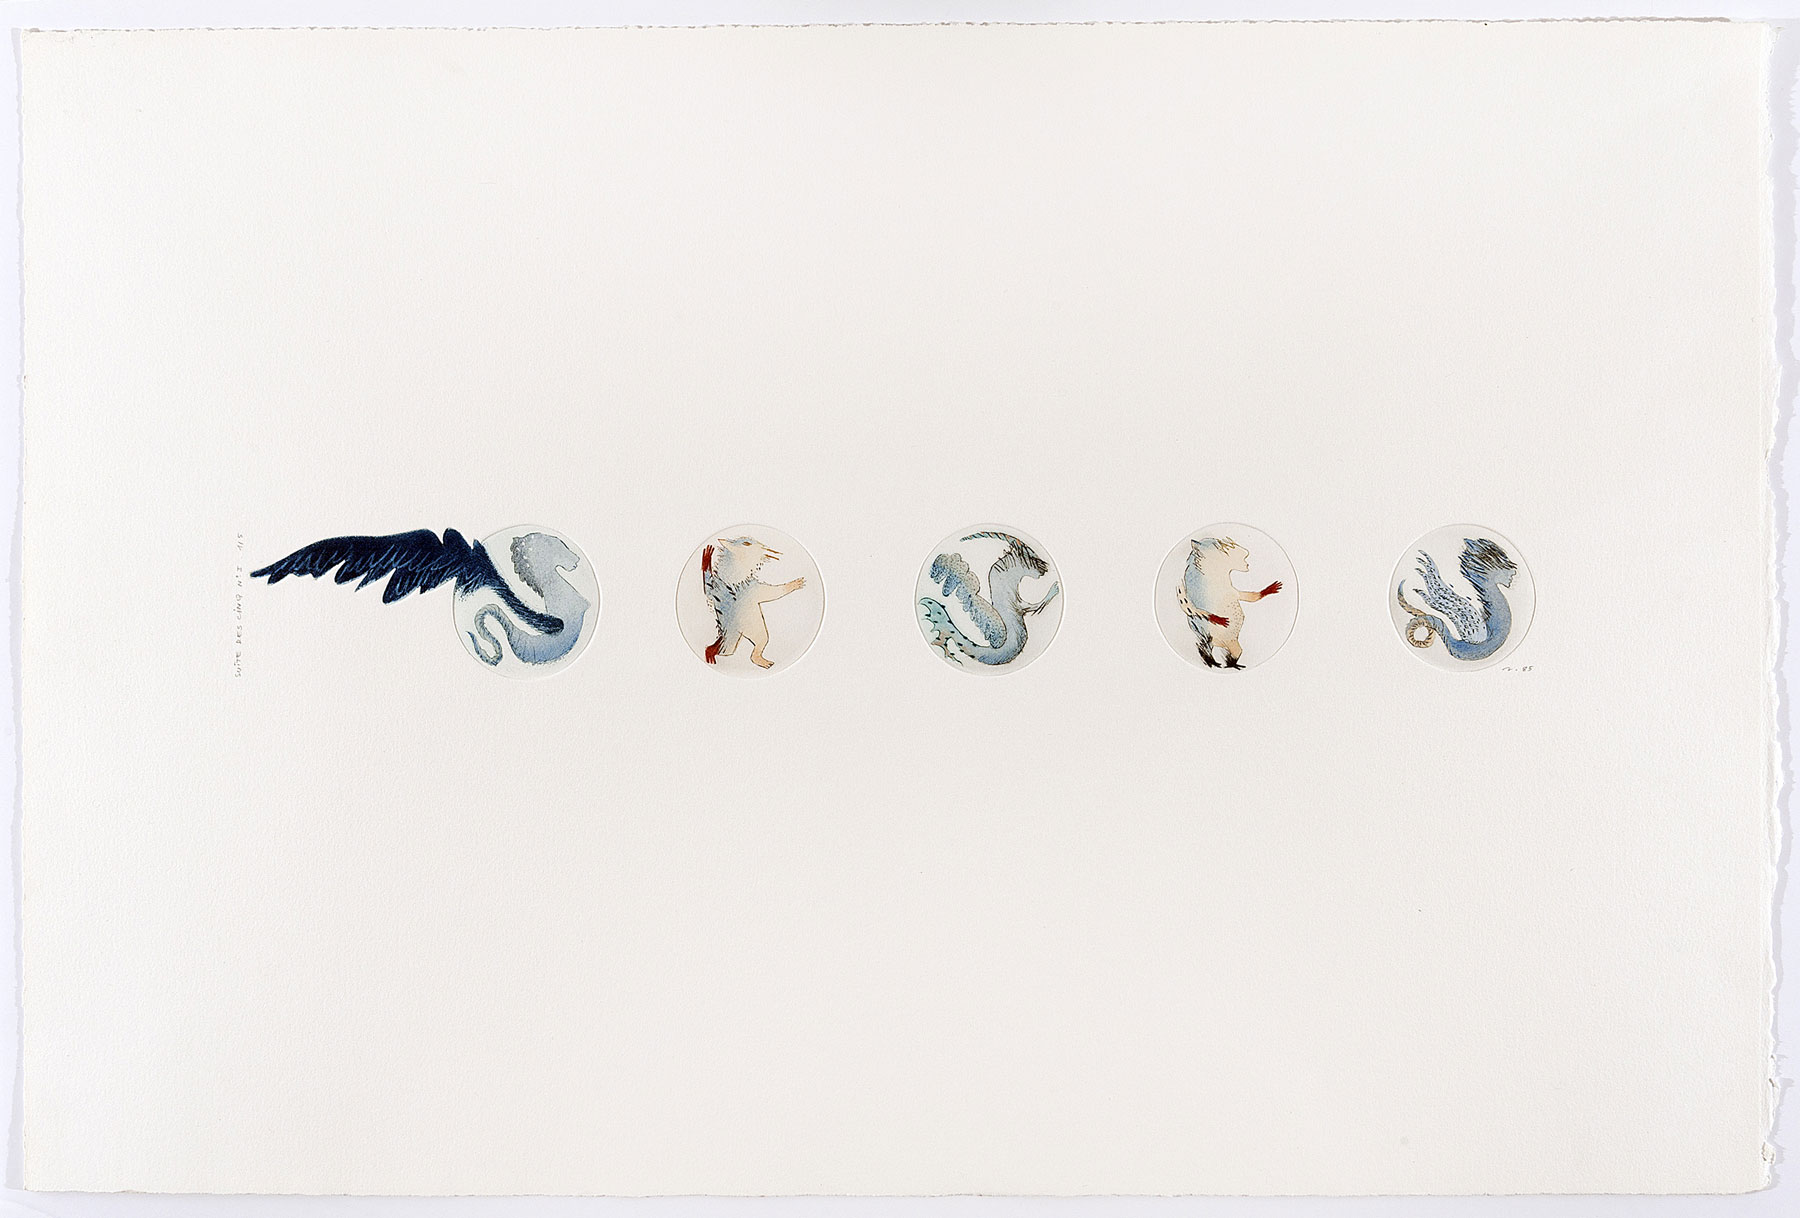 Anne Petrequin, Suite des cinq, n° I, II, III, IV, V, 1985. Collection macLYON